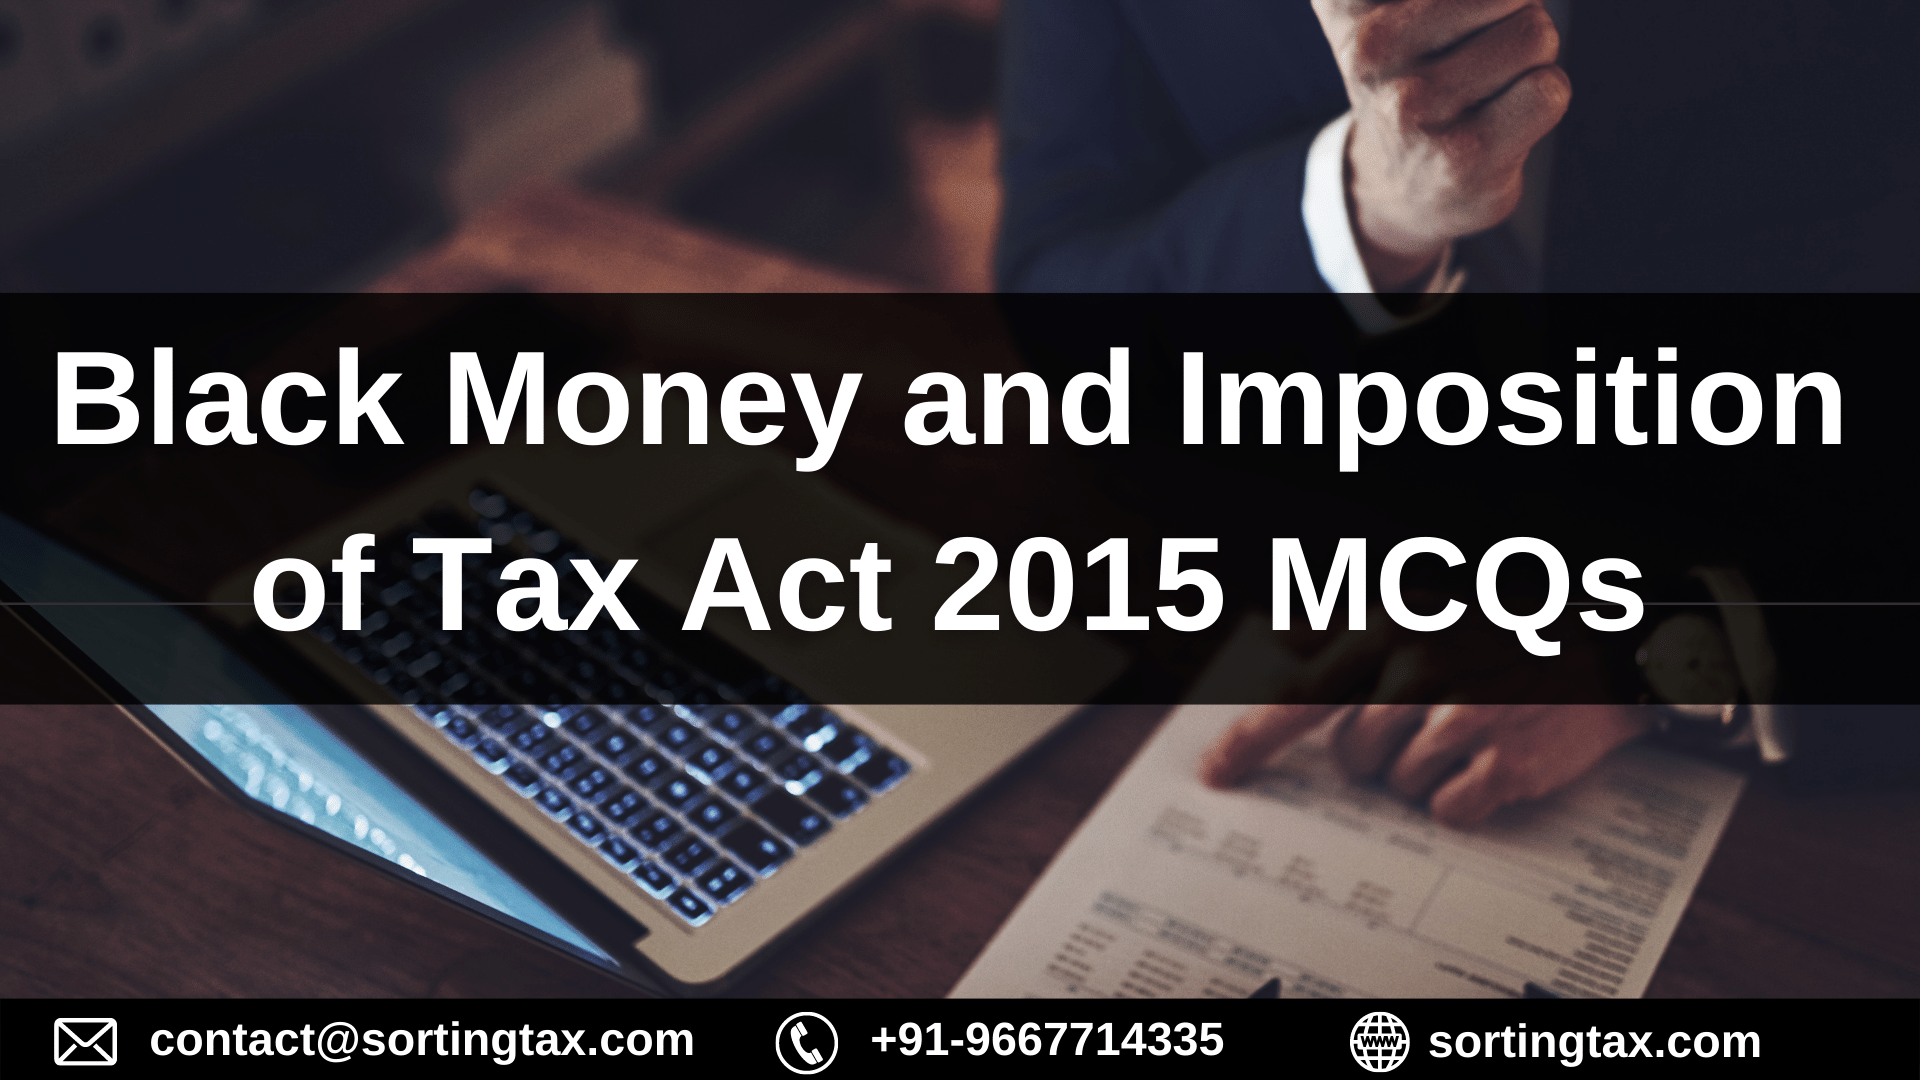 Black Money and Imposition of Tax Act 2015 MCQs - International Taxation